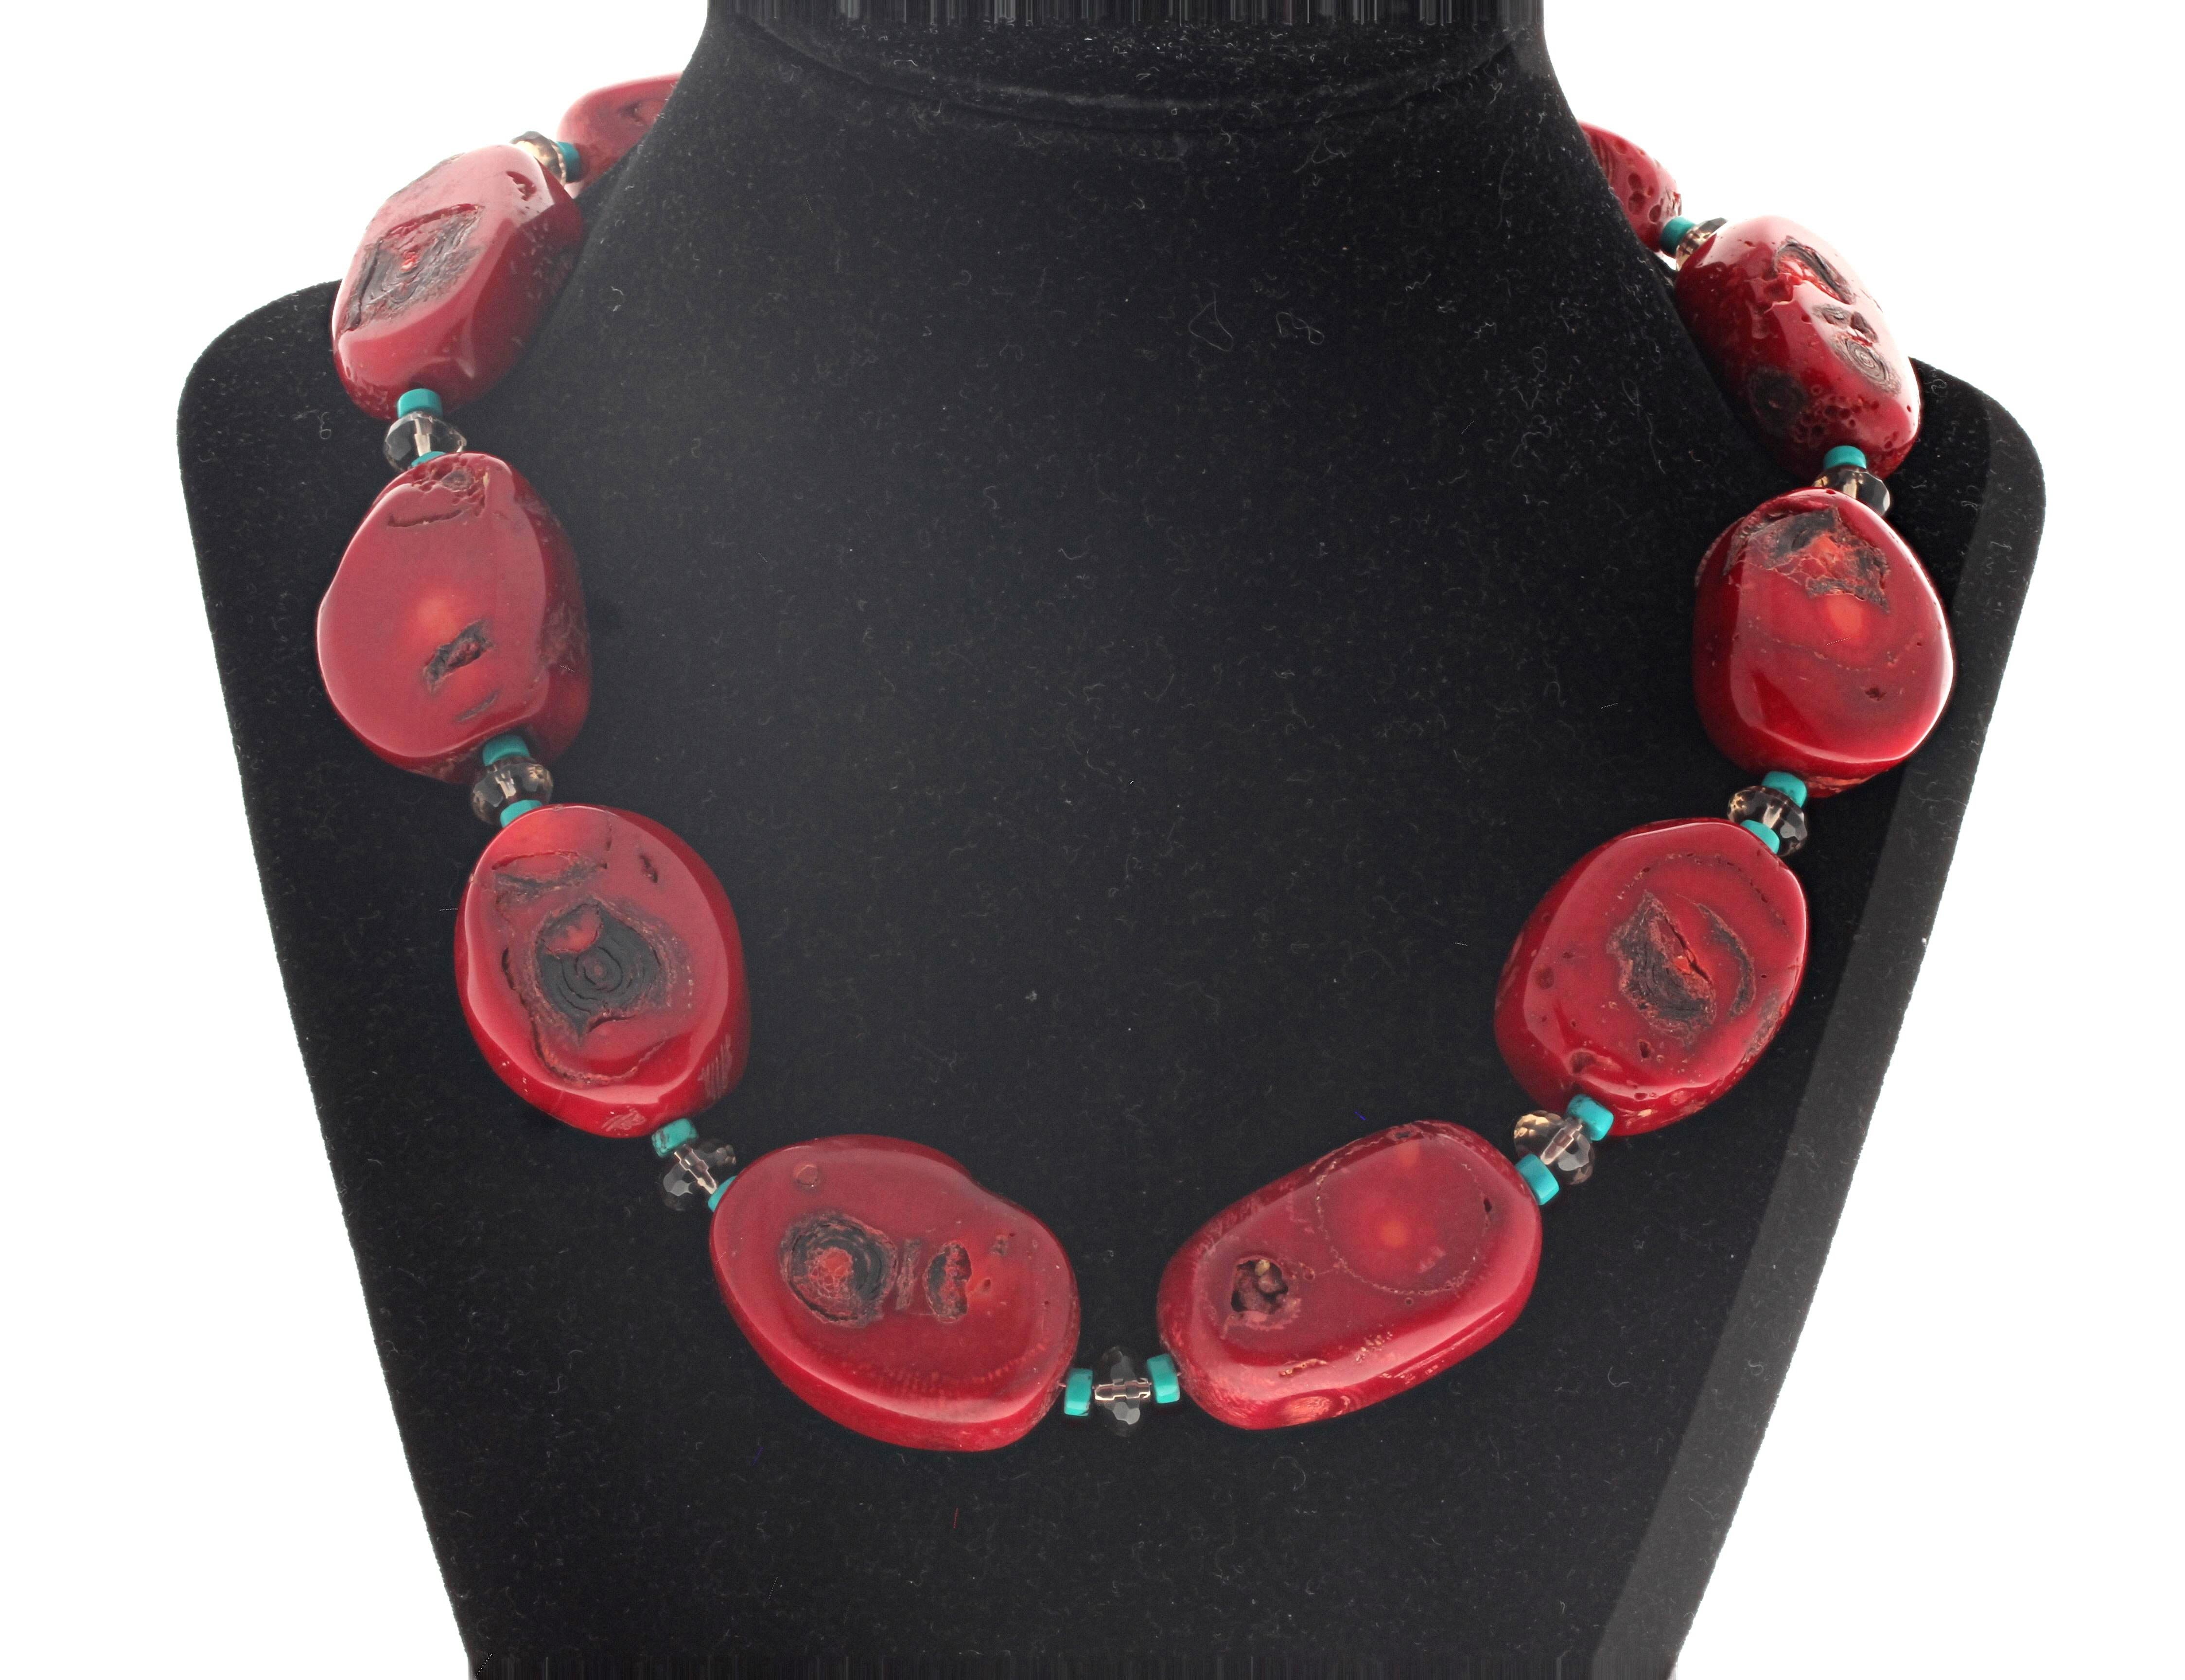 This elegant dramatic 18 inch long Coral statement necklace is enhanced by rondels of real Smoky Quartz and real blue Turquoise.  The Coral are approximately 30mm.  The gem cut Smoky Quartz are approximately 8mm.  The Turquoise are approximately